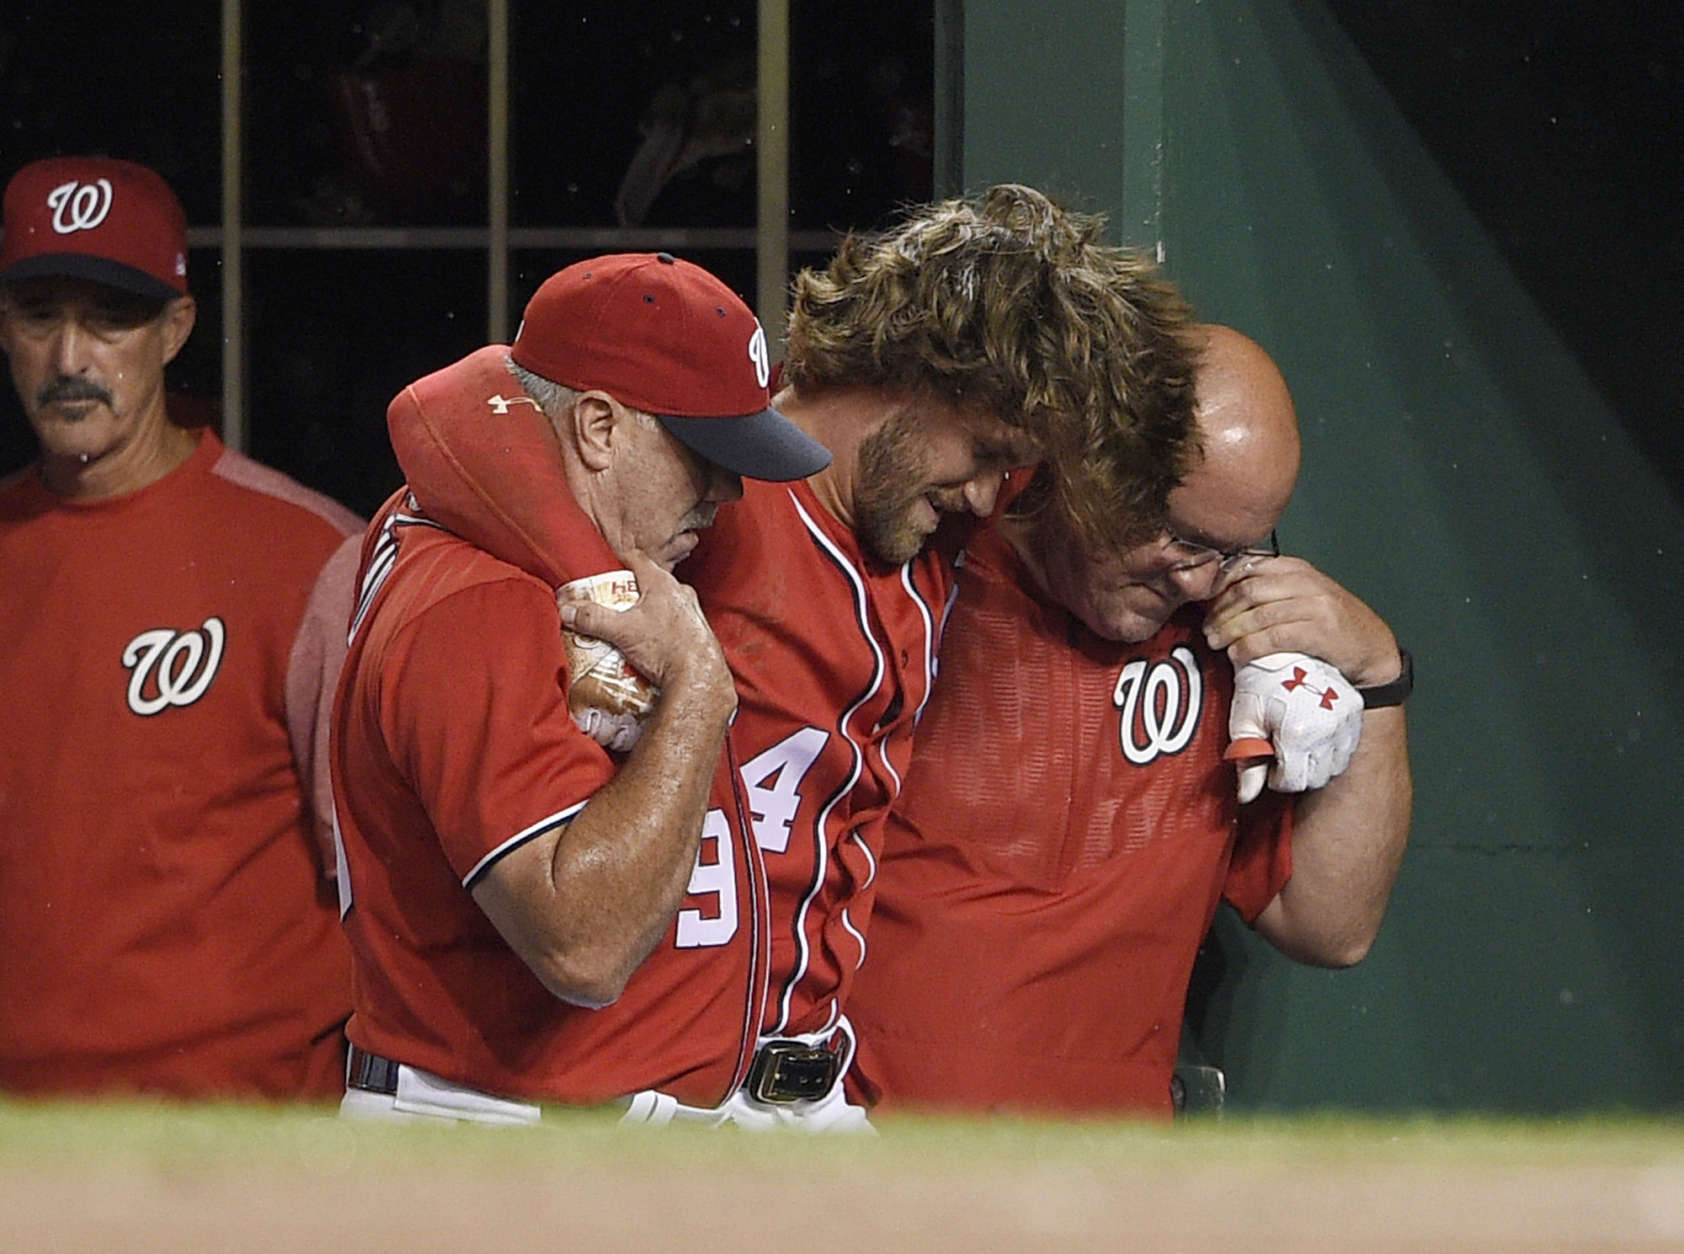 Washington Nationals' Bryce Harper, center, is helped in the dugout after he was injured during the first inning of the team's baseball game against the San Francisco Giants, Saturday, Aug. 12, 2017, in Washington. (AP Photo/Nick Wass)